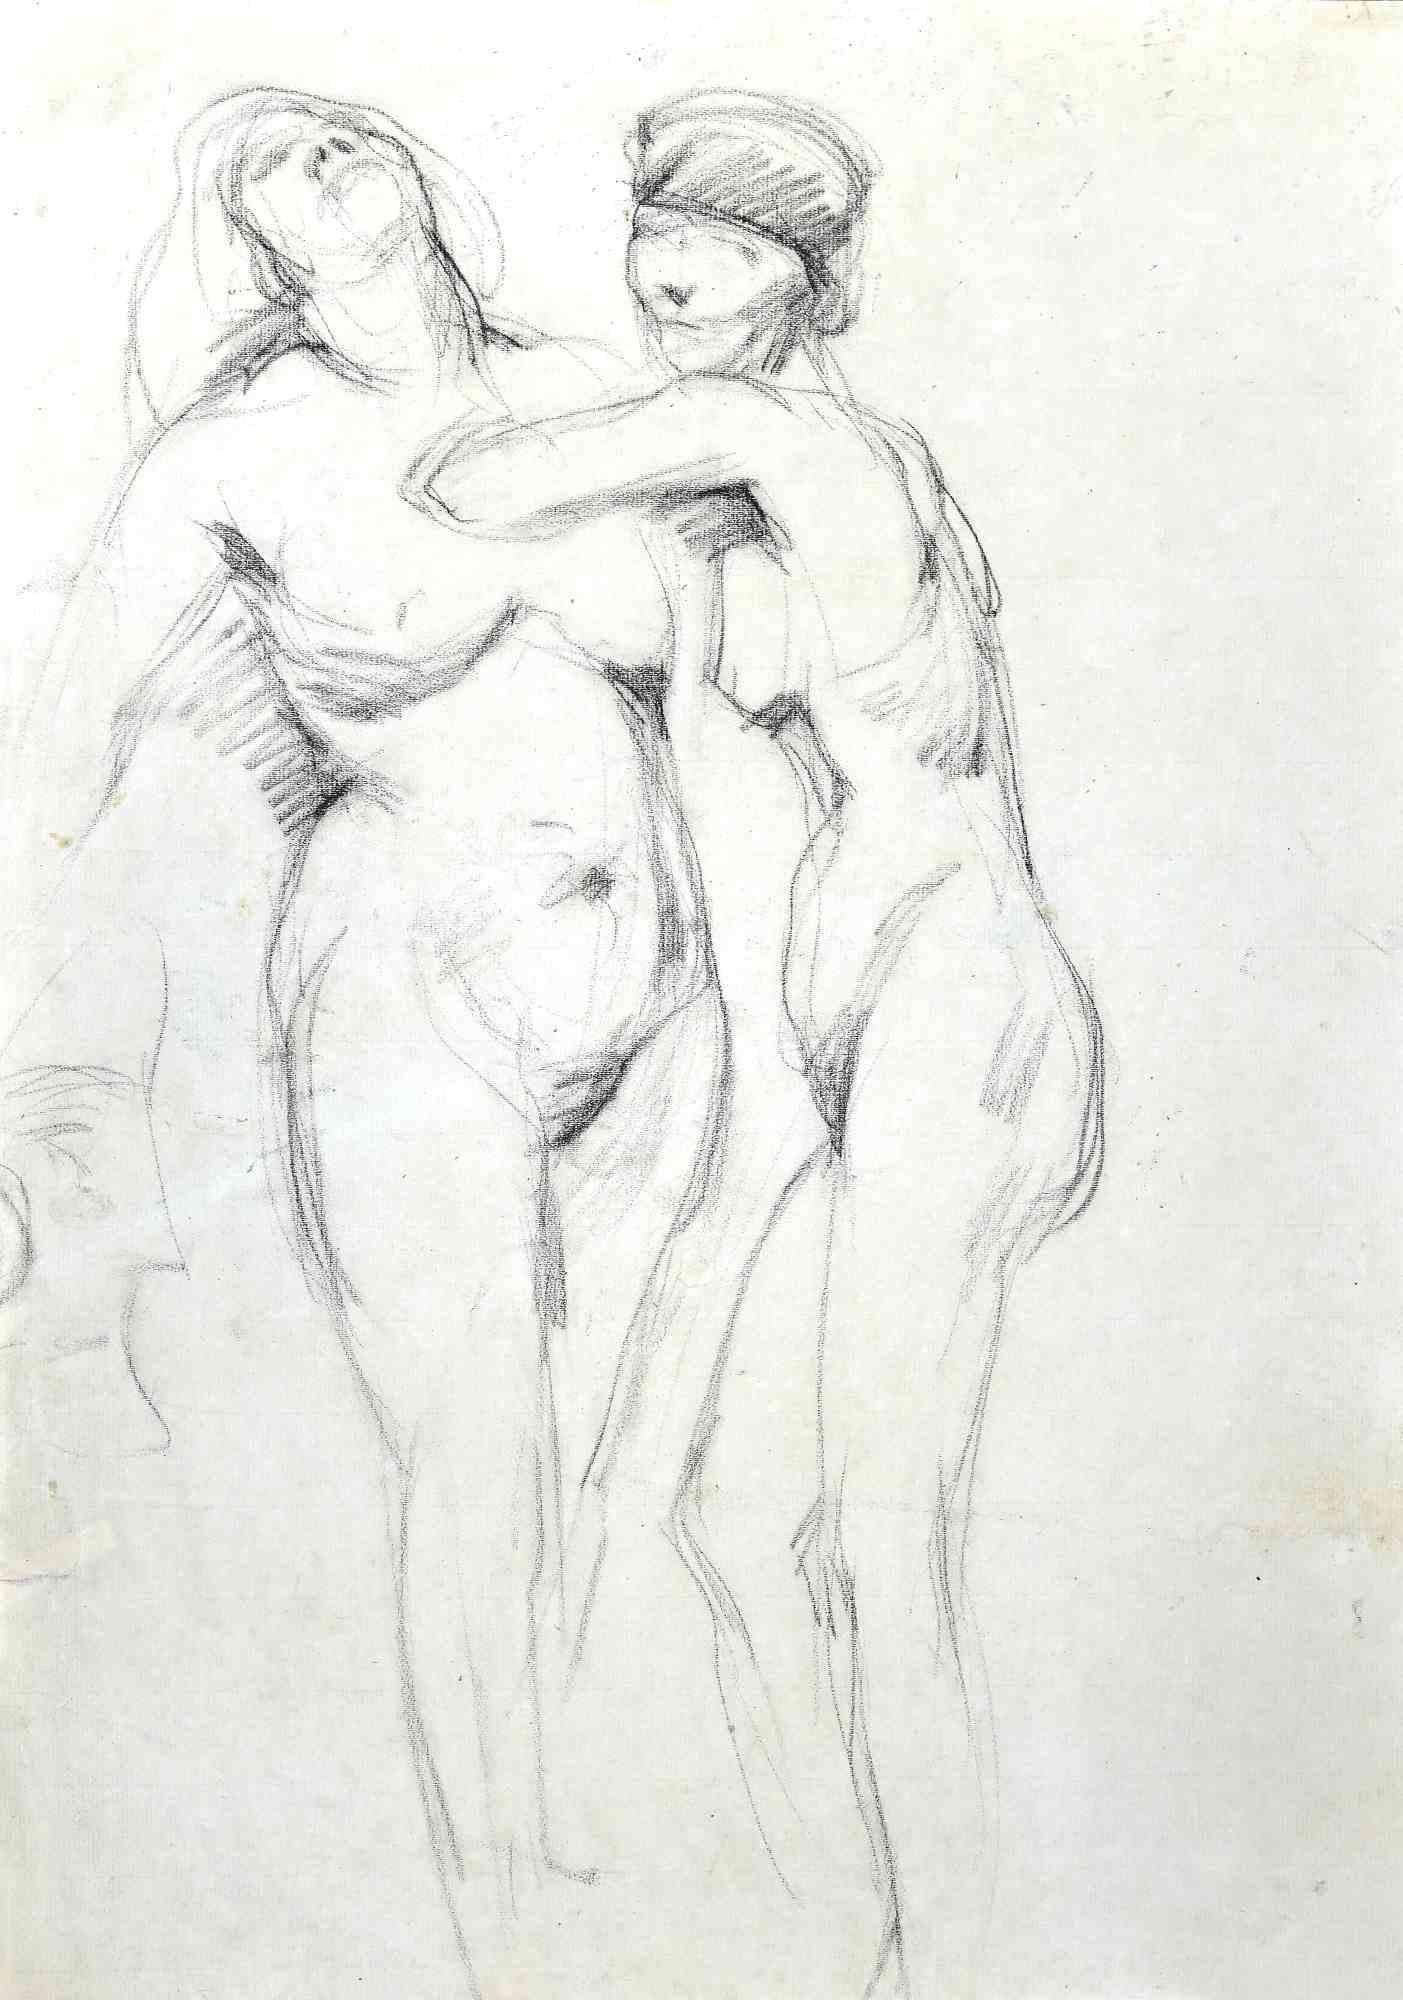 Unknown Figurative Art - Pair of Nudes - Drawing in Pencil - Early 20th Century